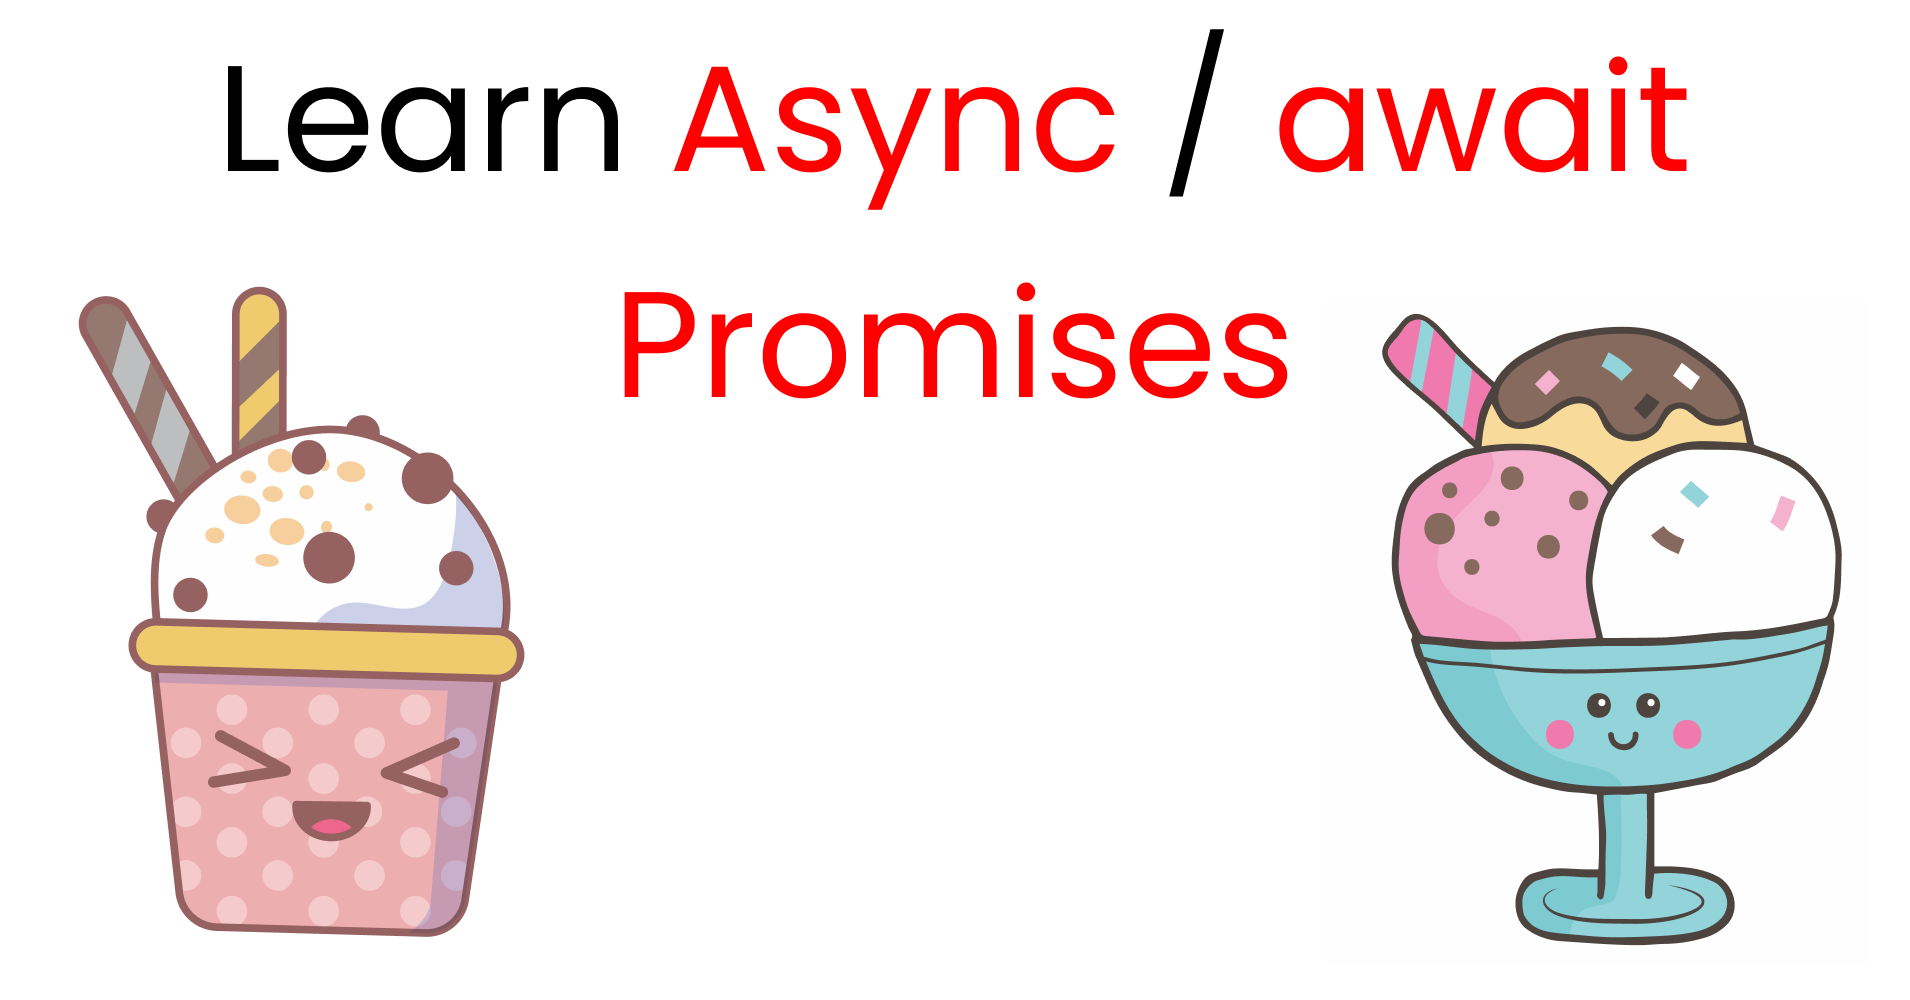 I have found a code on the back of the Async merch website, any